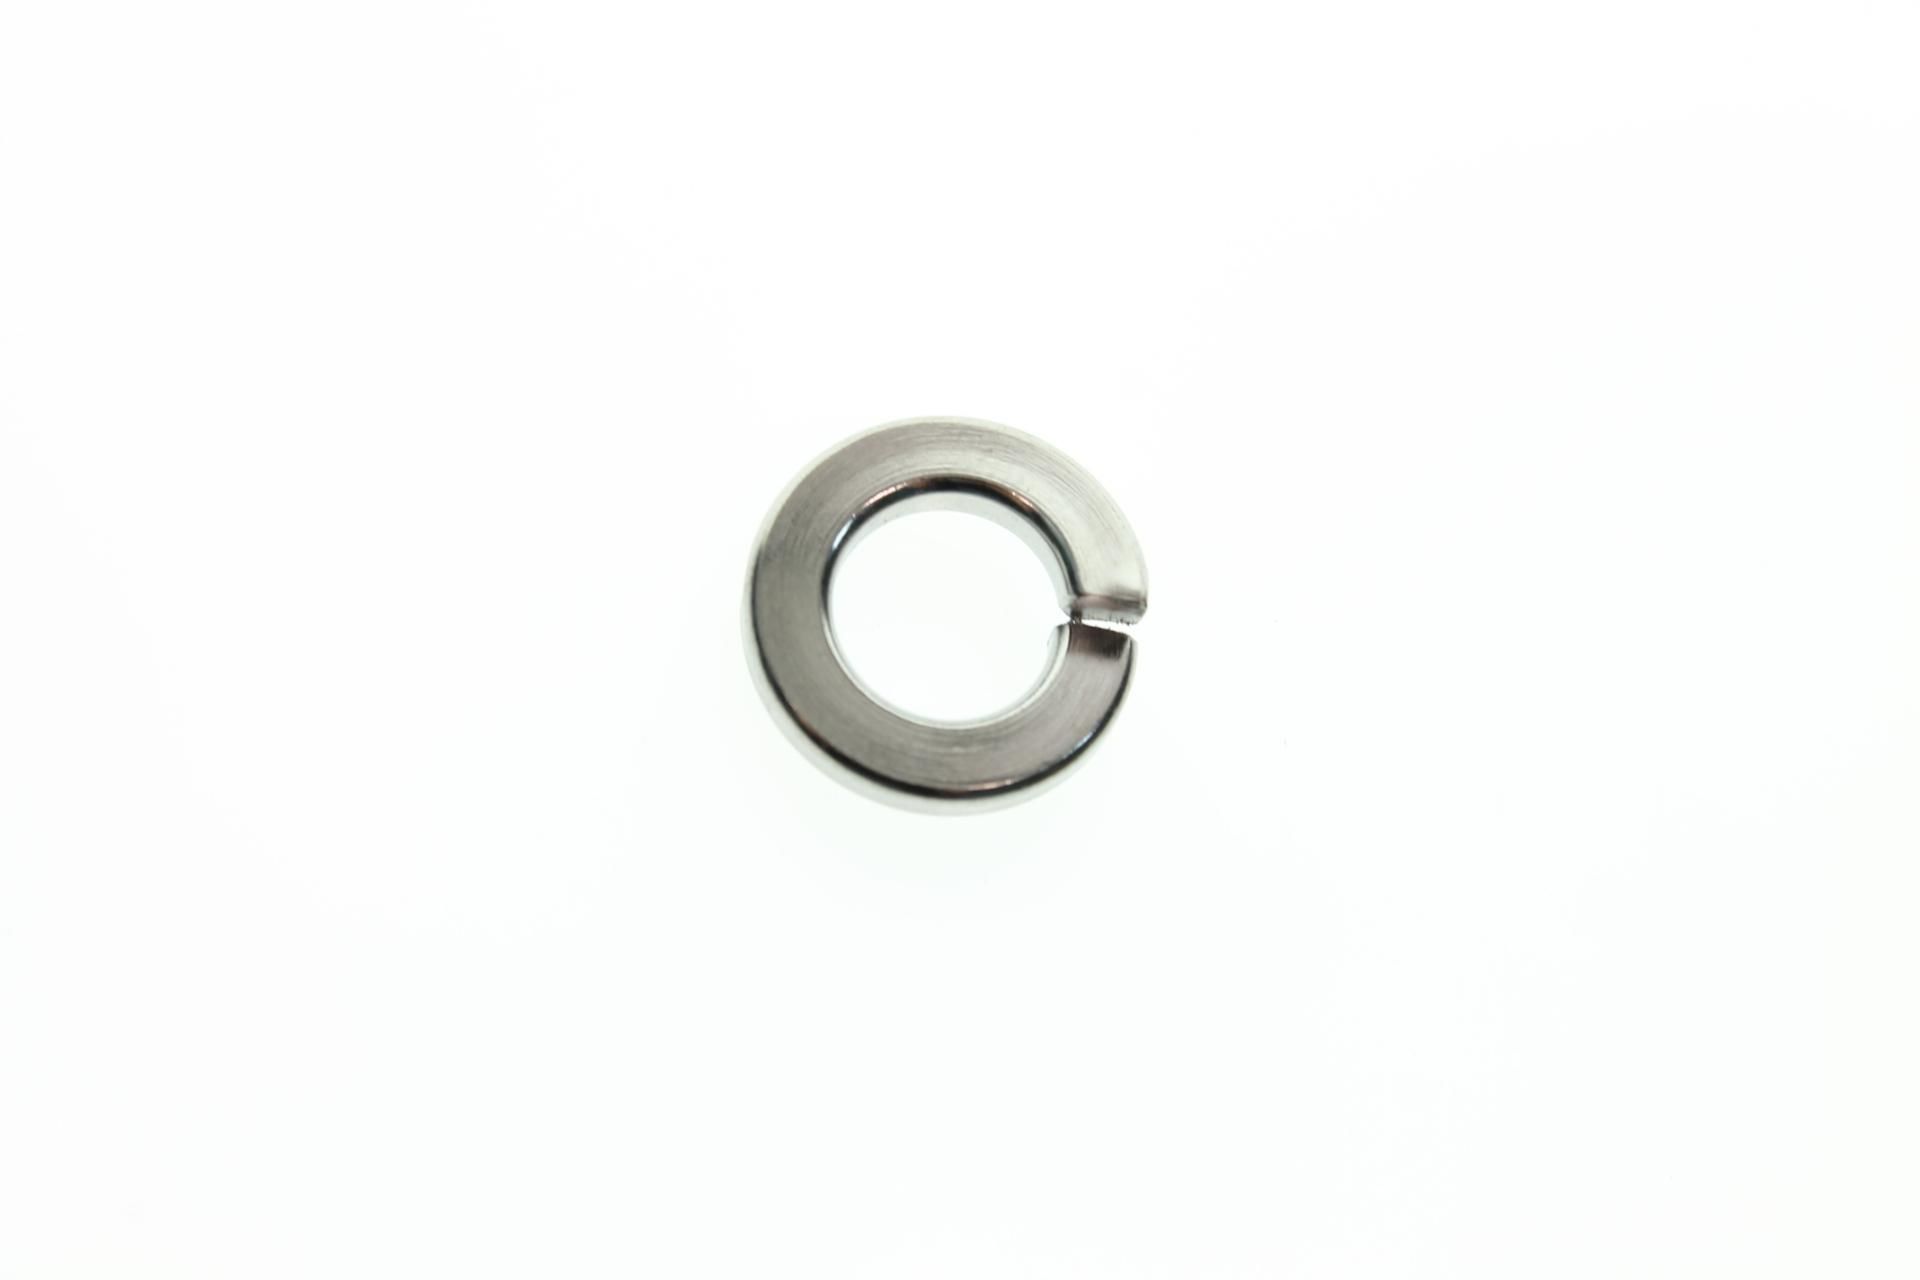 09162-08005 Superseded by 08321-01087 - LOCK WASHER